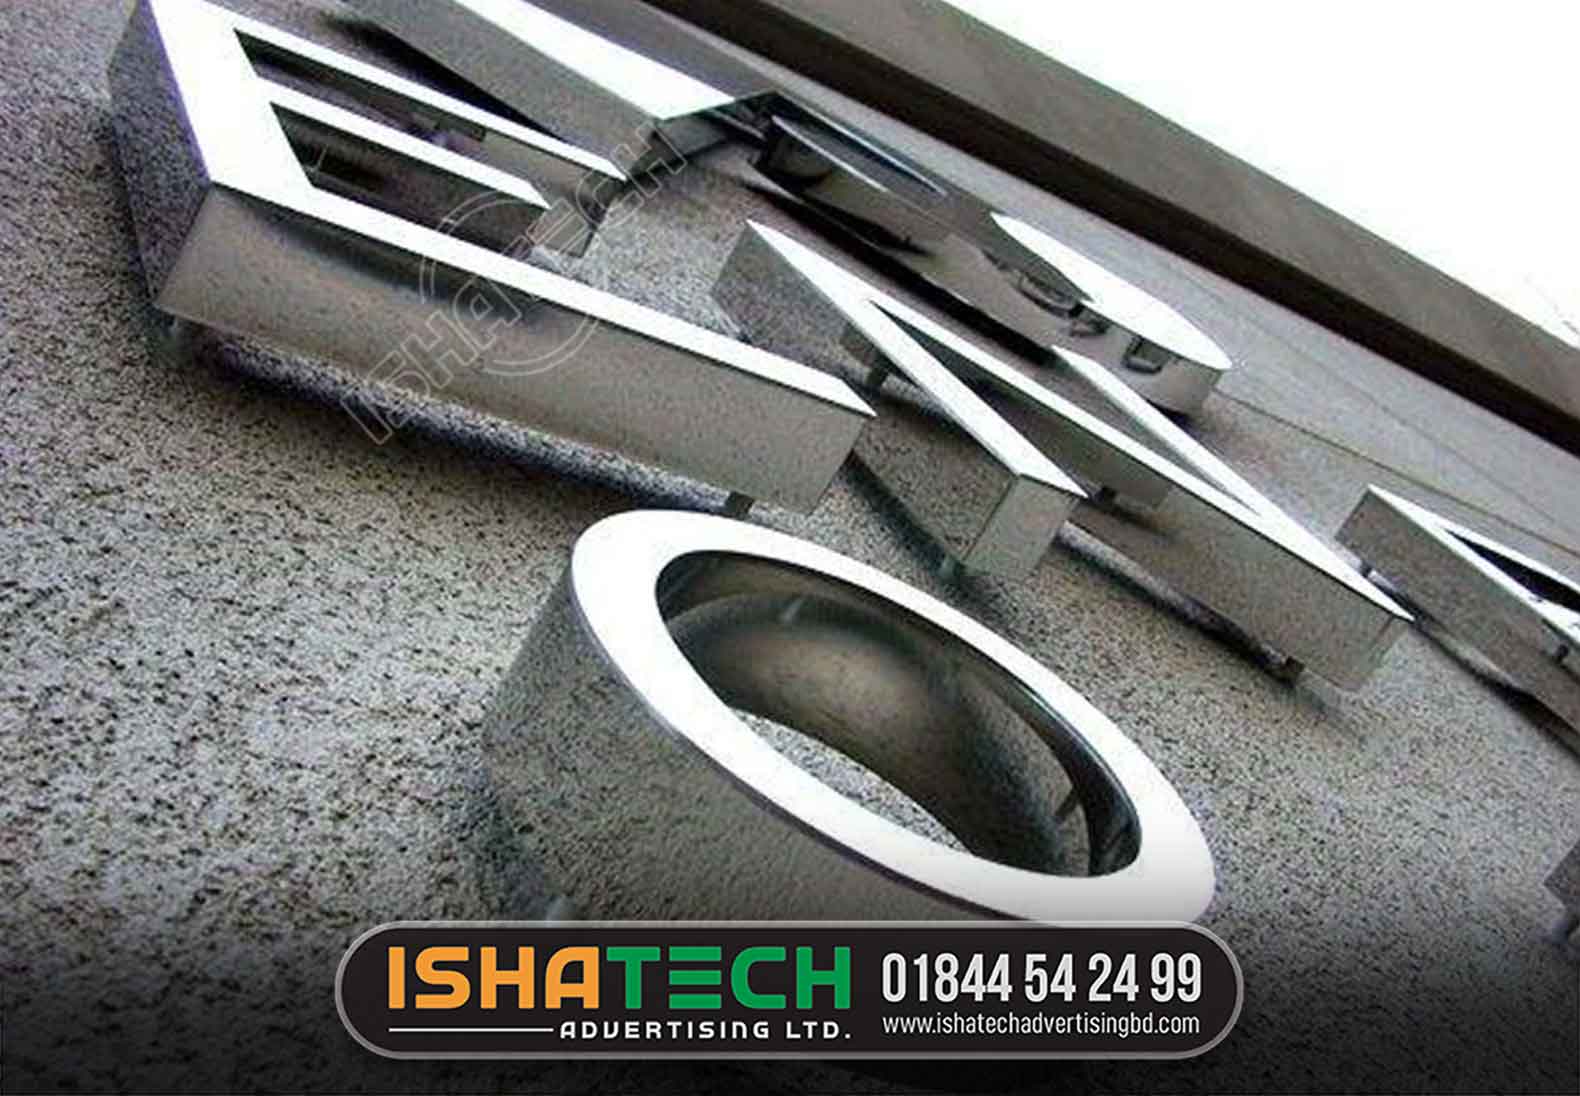 Stainless Steel 3D Letter Latest Price, Manufacturers. Mirror Finish Stainless Steel 3D Letter, For Promotion. SS letter Sign board price in Bangladesh. Stainless Steel Letters Manufacturer in Gurgaon - 3d Led. 3D Stainless Steel Letters Fabricated Metal Letters Supplier.